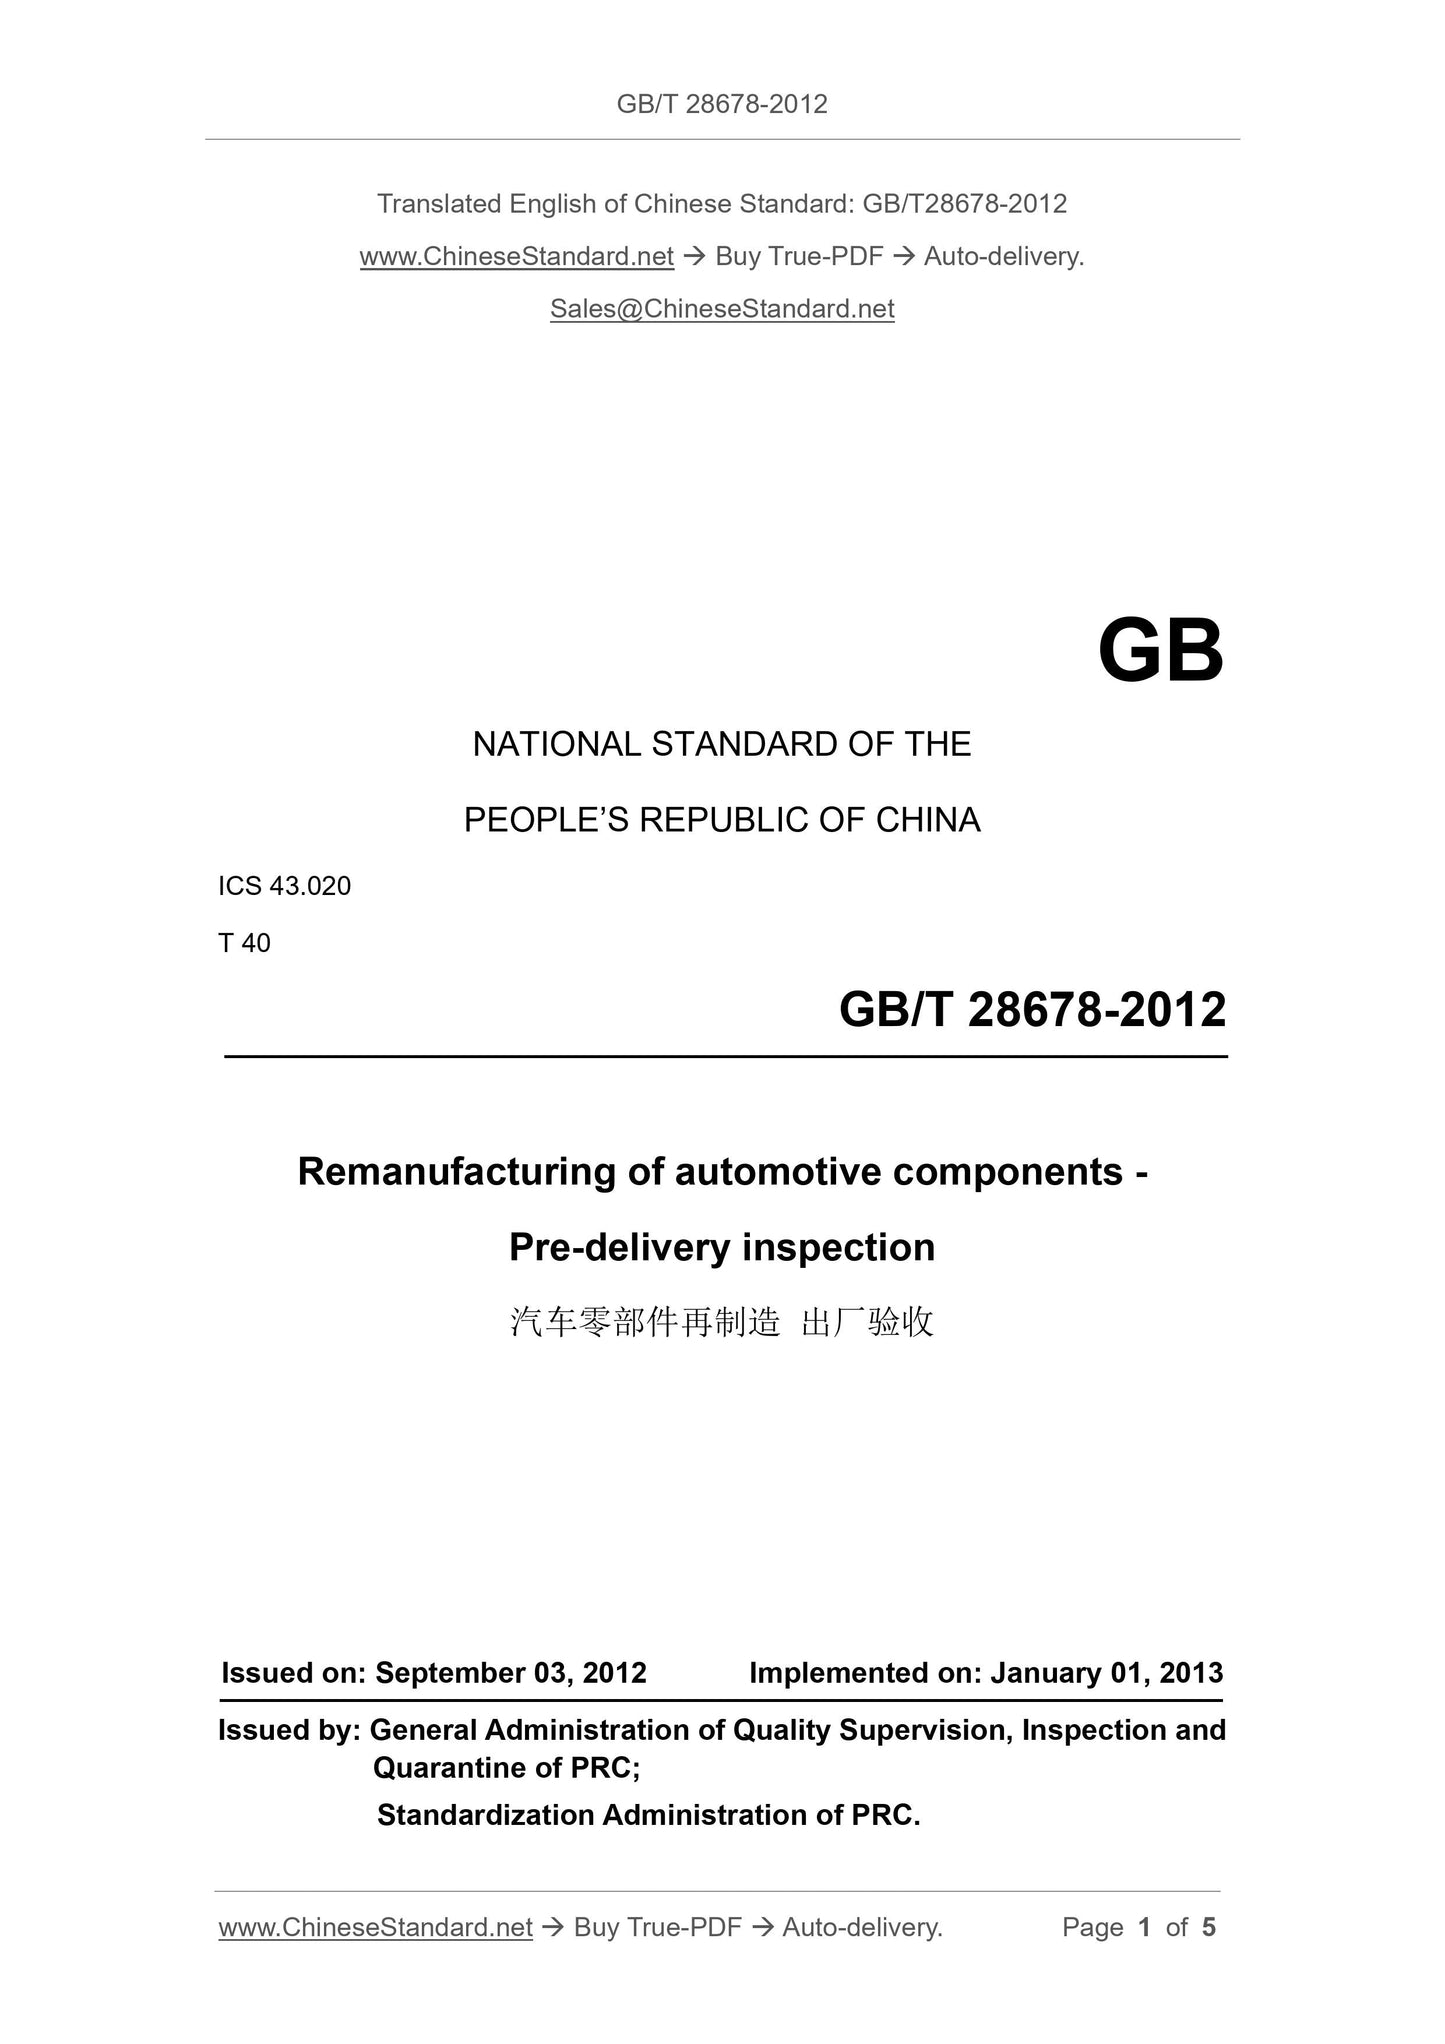 GB/T 28678-2012 Page 1